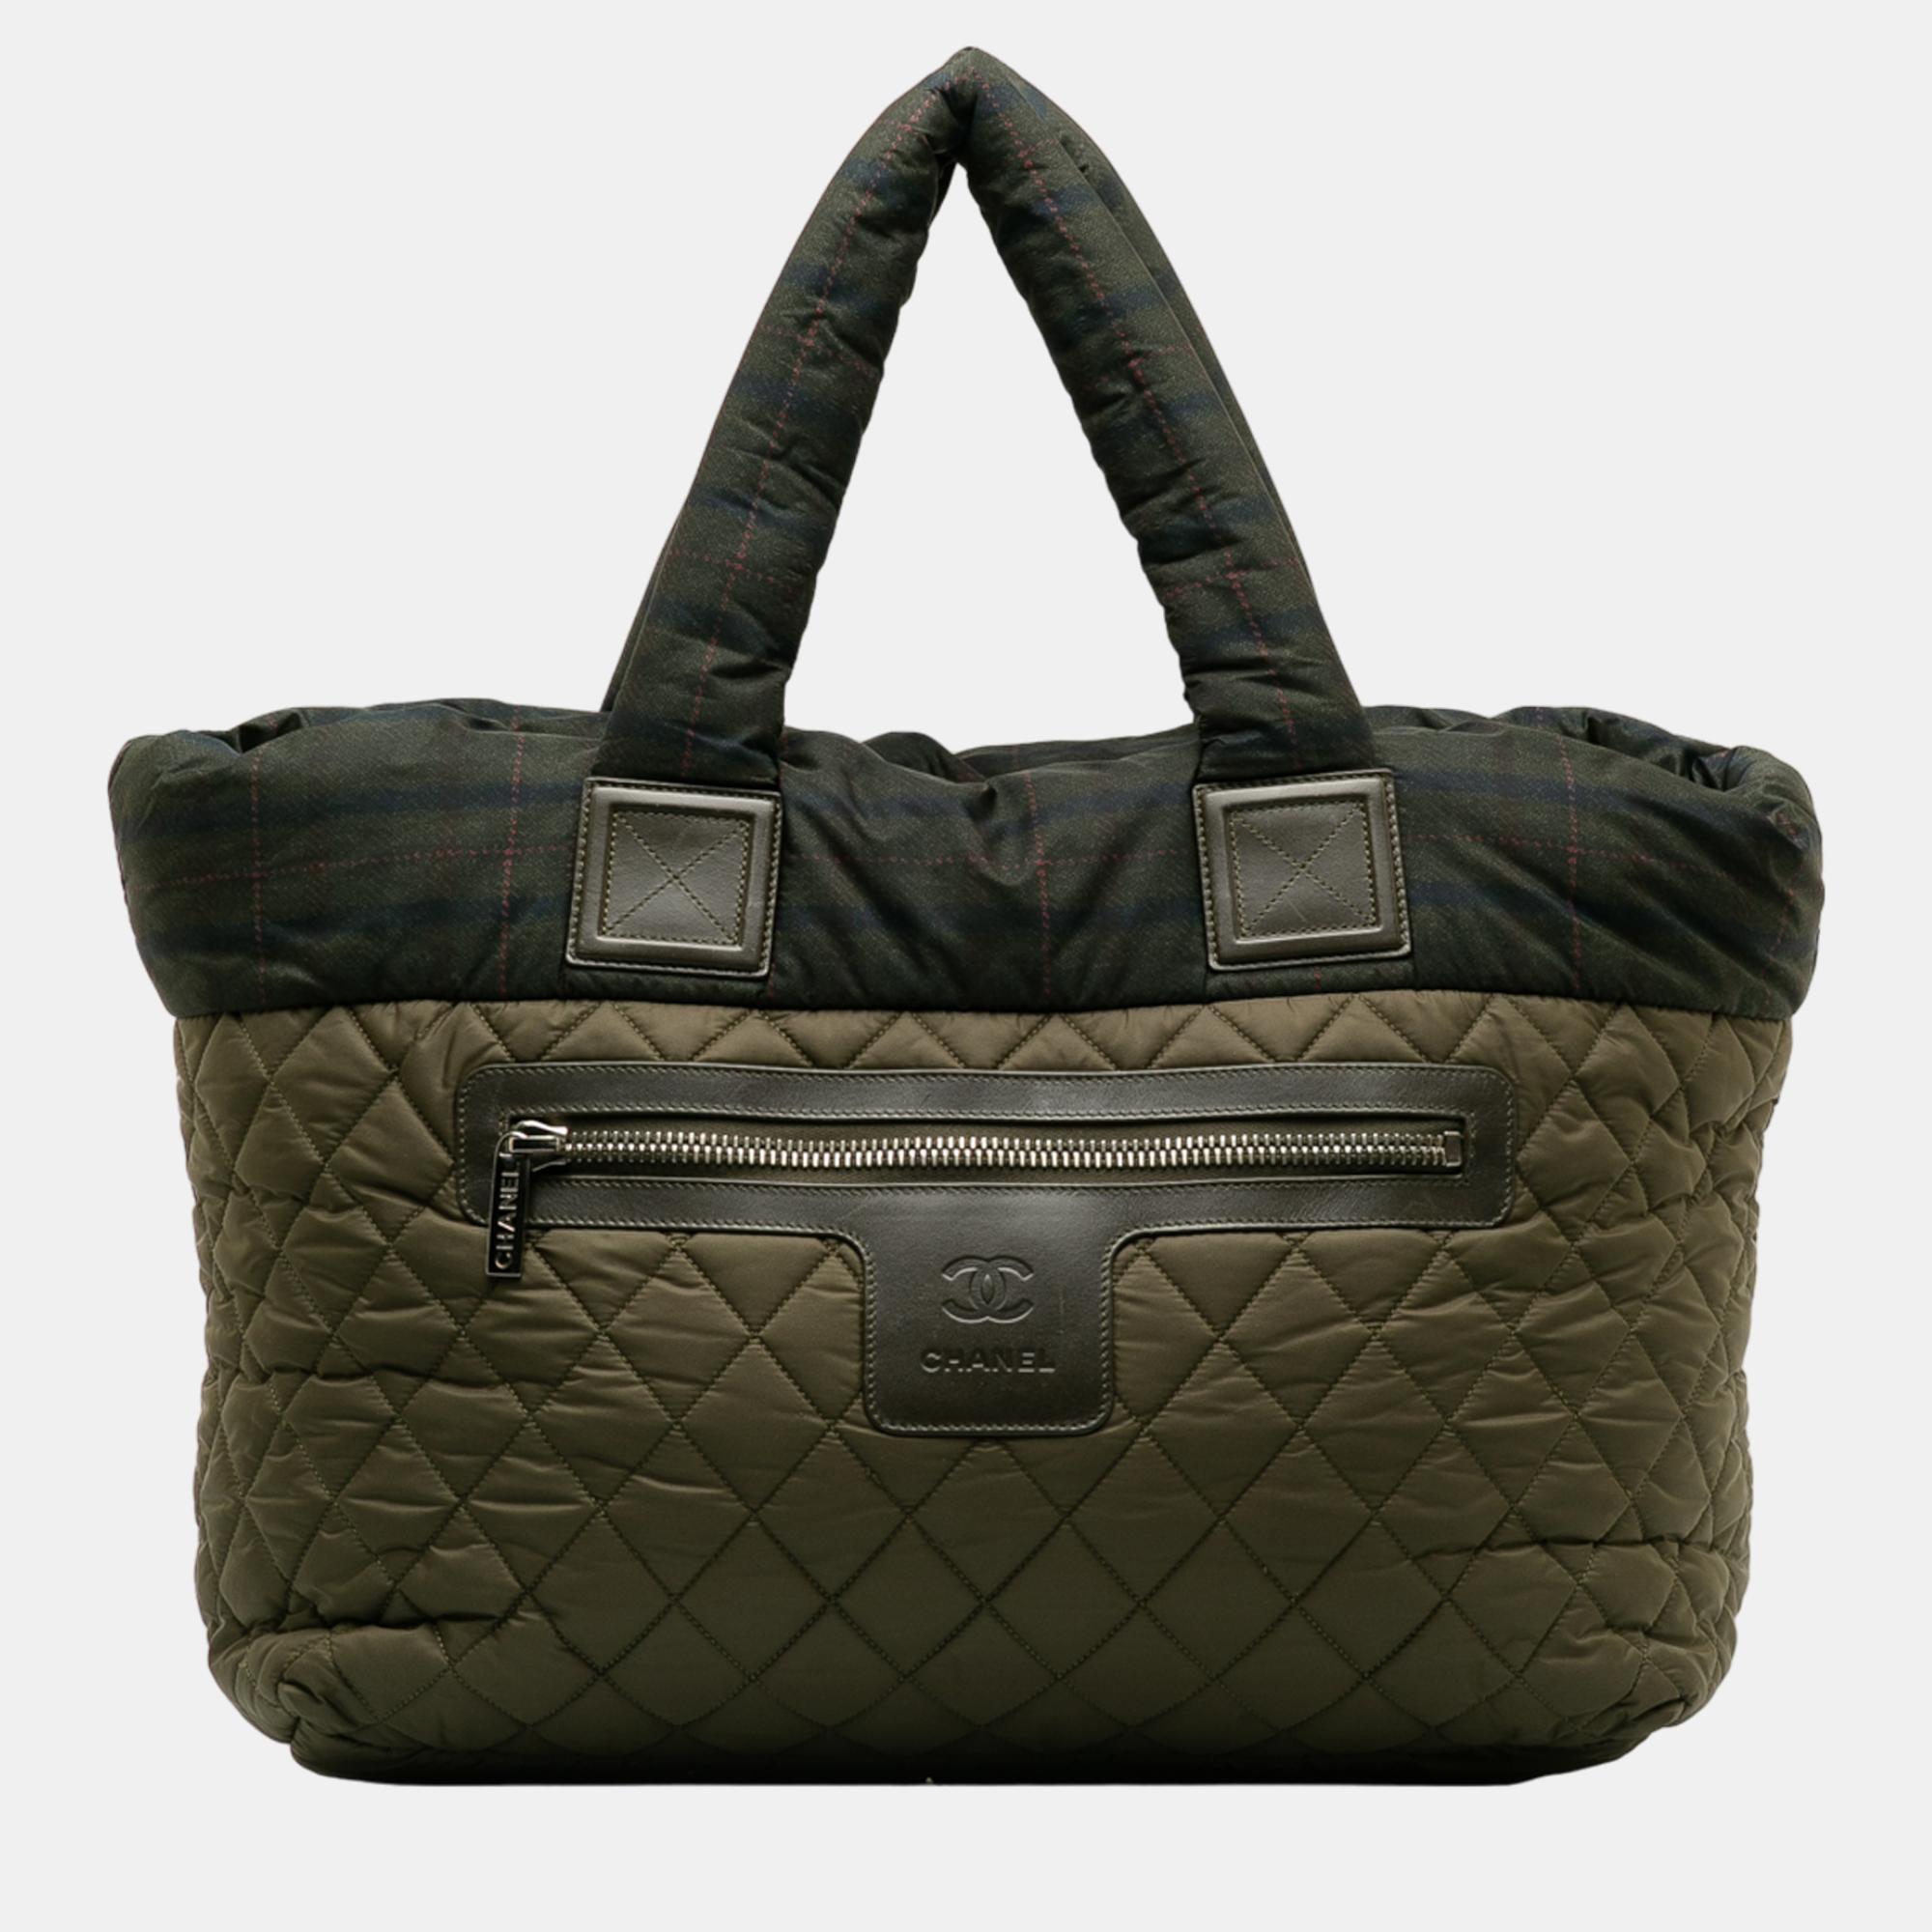 

Chanel Green Large Coco Cocoon Tote